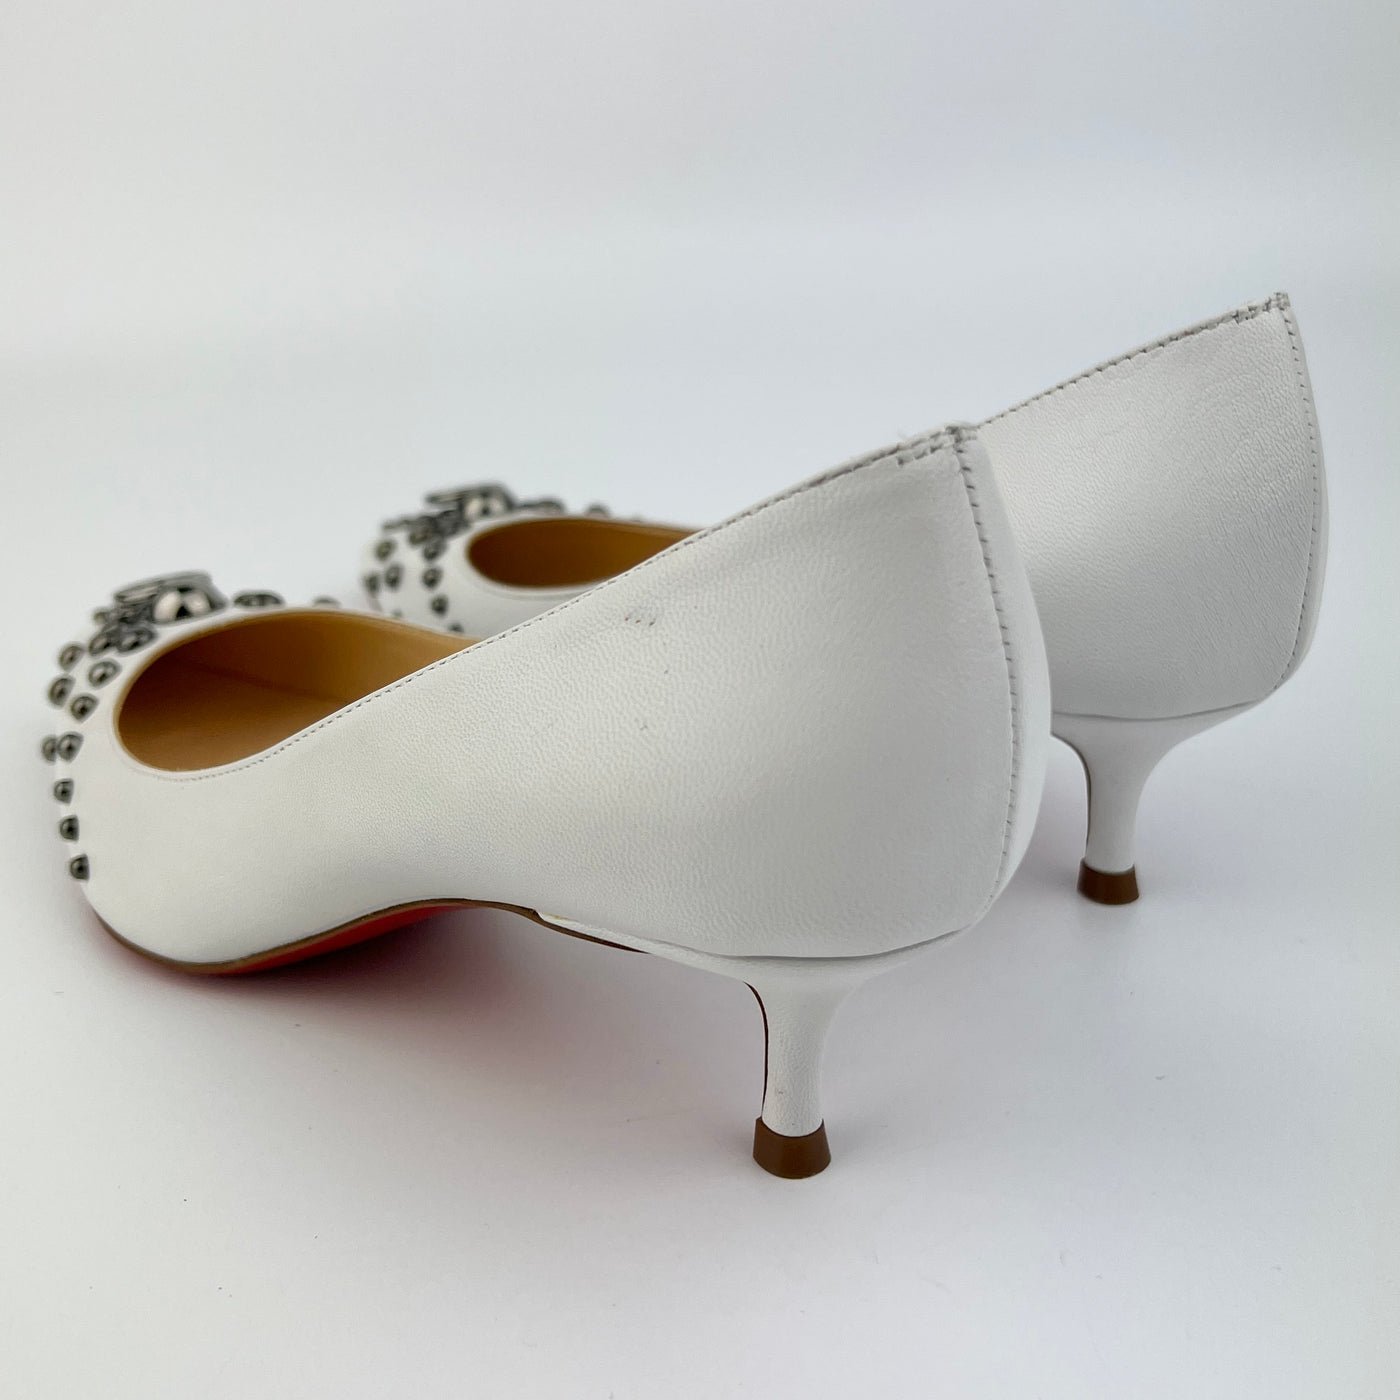 Christian Louboutin White Leather Door Knock Studded Pumps Size 38